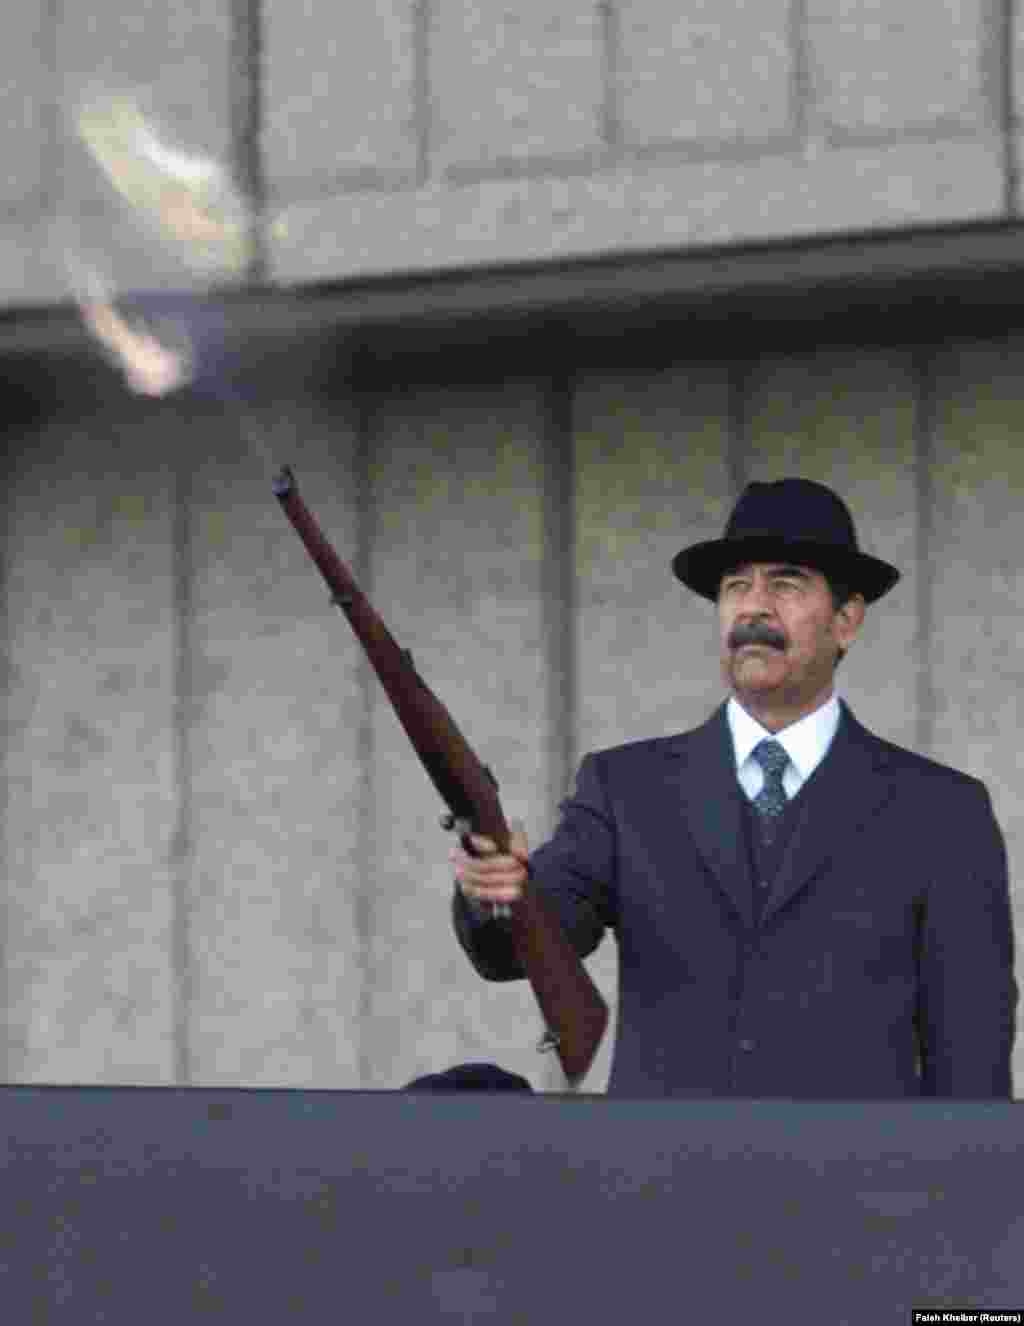 Iraqi President Saddam Hussein fires a rifle with one hand while holding a cigar in the other during a military parade in December 2000.